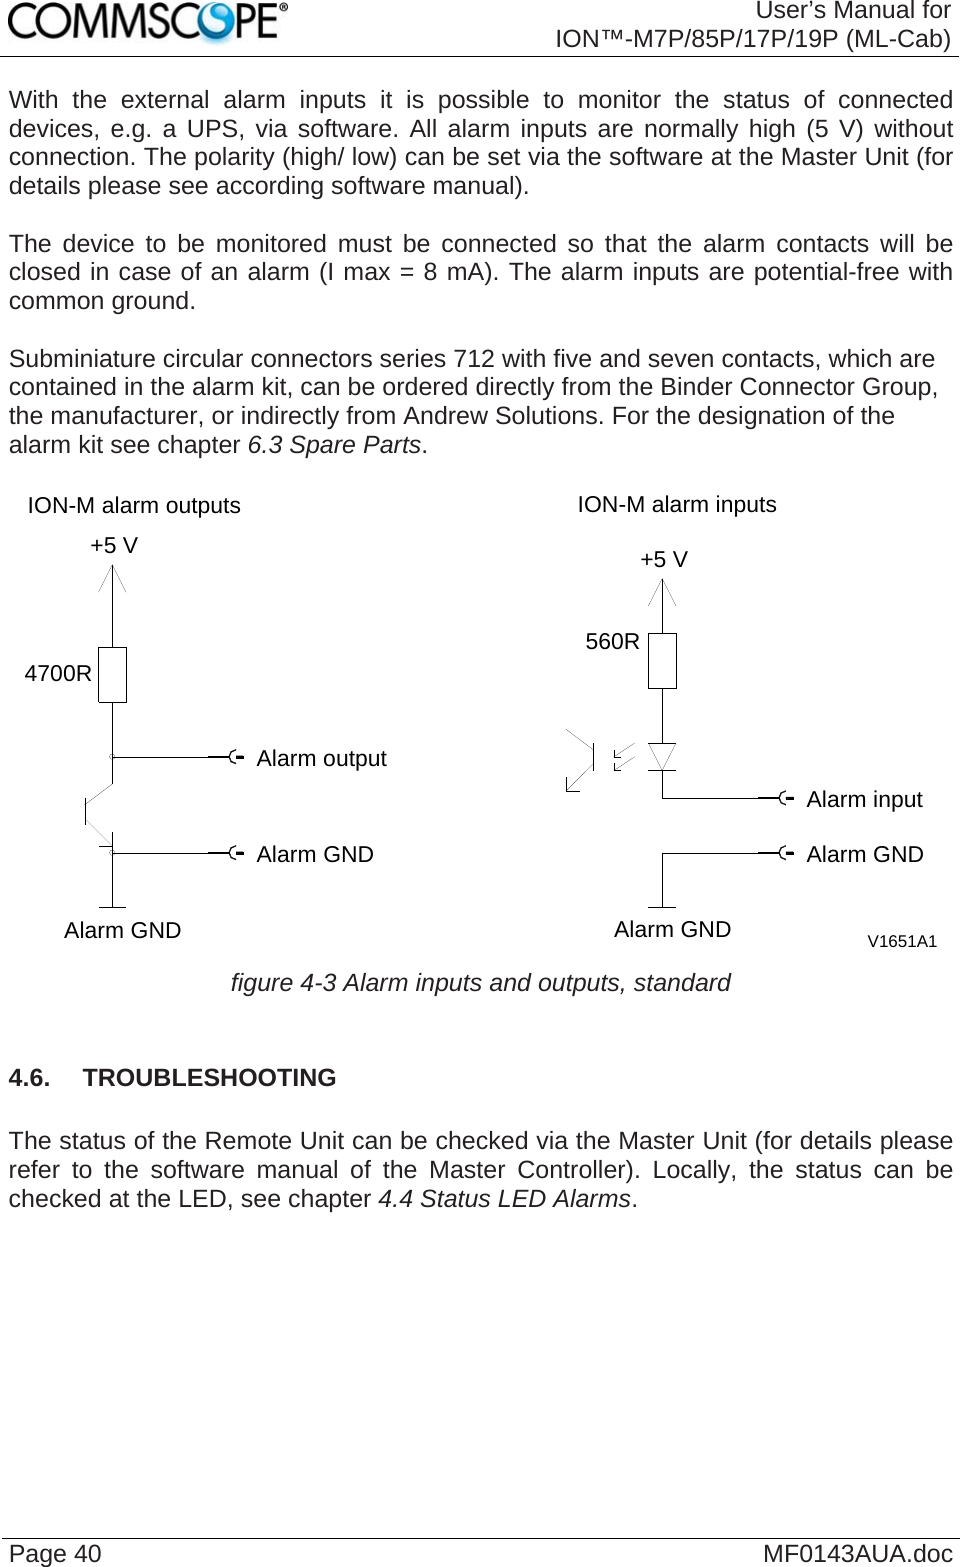  User’s Manual for ION™-M7P/85P/17P/19P (ML-Cab) Page 40  MF0143AUA.docWith the external alarm inputs it is possible to monitor the status of connected devices, e.g. a UPS, via software. All alarm inputs are normally high (5 V) without connection. The polarity (high/ low) can be set via the software at the Master Unit (for details please see according software manual).  The device to be monitored must be connected so that the alarm contacts will be closed in case of an alarm (I max = 8 mA). The alarm inputs are potential-free with common ground.  Subminiature circular connectors series 712 with five and seven contacts, which are contained in the alarm kit, can be ordered directly from the Binder Connector Group, the manufacturer, or indirectly from Andrew Solutions. For the designation of the alarm kit see chapter 6.3 Spare Parts.  V1651A1Alarm outputAlarm GNDAlarm GNDAlarm GNDAlarm GNDAlarm inputION-M alarm outputs4700R+5 VION-M alarm inputs+5 V560R figure 4-3 Alarm inputs and outputs, standard  4.6.  TROUBLESHOOTING  The status of the Remote Unit can be checked via the Master Unit (for details please refer to the software manual of the Master Controller). Locally, the status can be checked at the LED, see chapter 4.4 Status LED Alarms.    